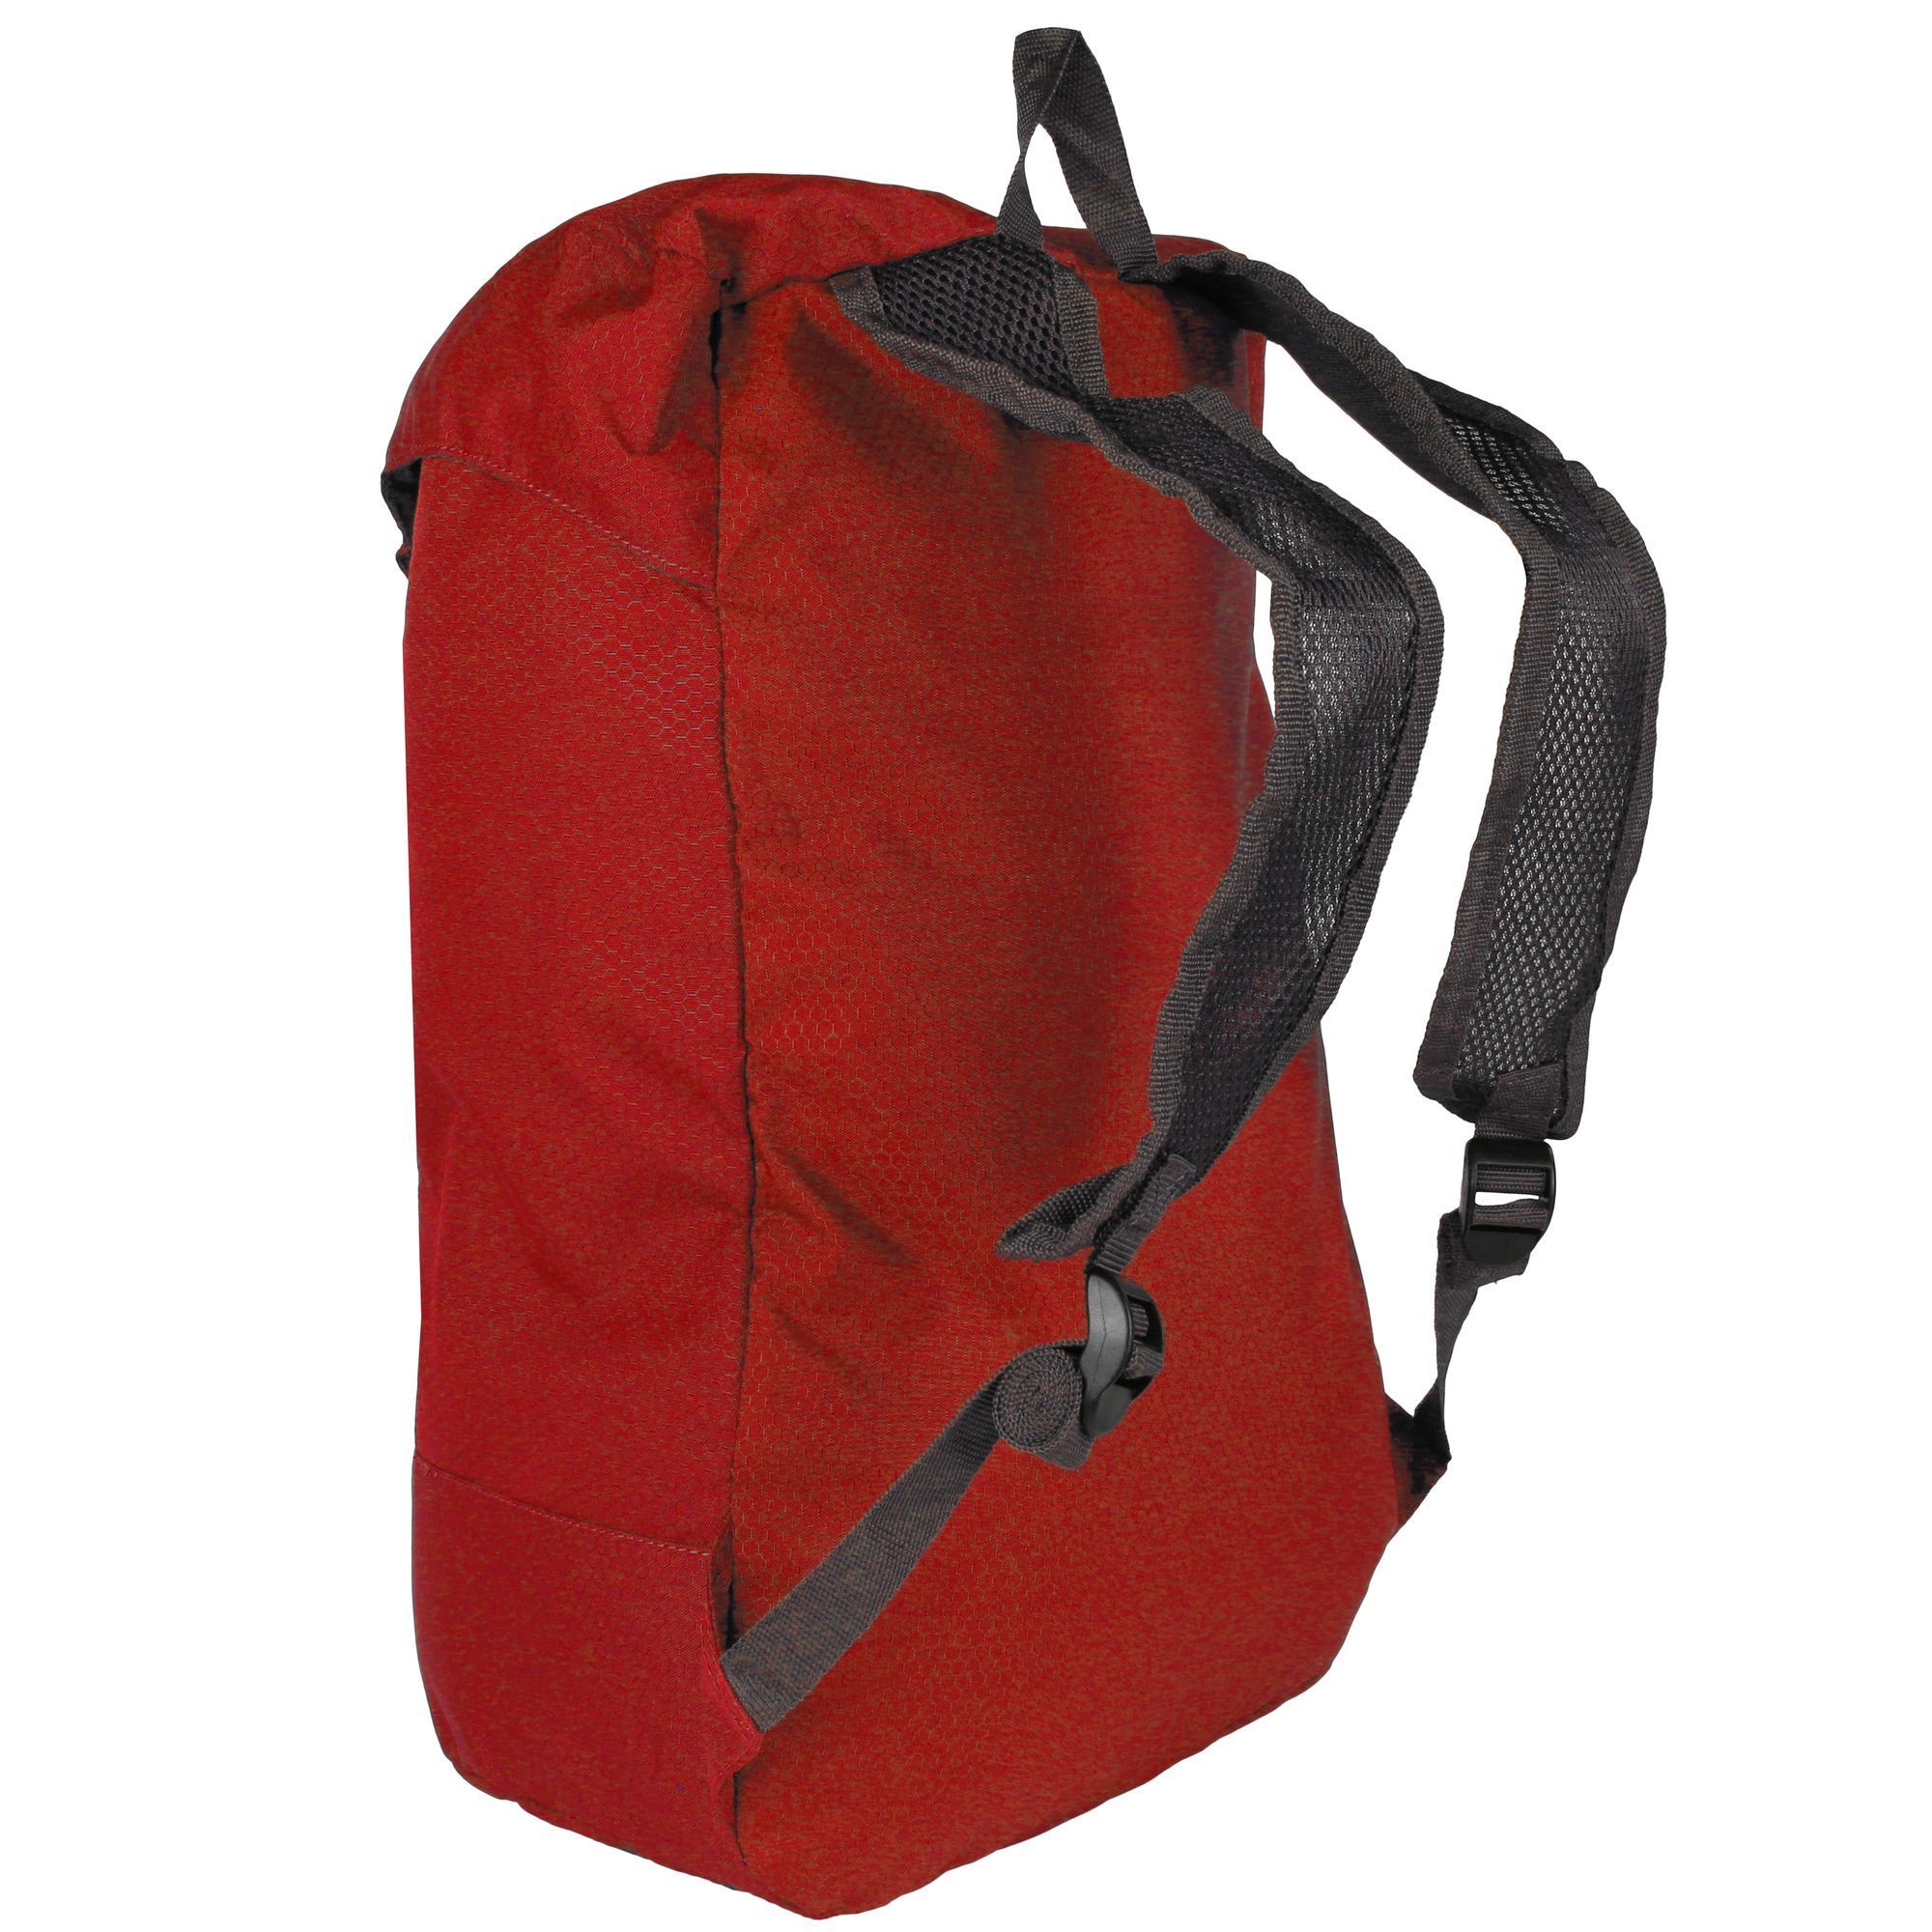 The Easypack II Packaway 25 Litre is a lightweight rucksack that handily folds down into its front pocket. It works brilliantly as a day bag when you want to leave your rucksack at base or as a picnic bag on camping trips and holidays. The straps use lightweight mesh fabric for breathability, and it features an easy carry handle on the top. 100% Polyester.